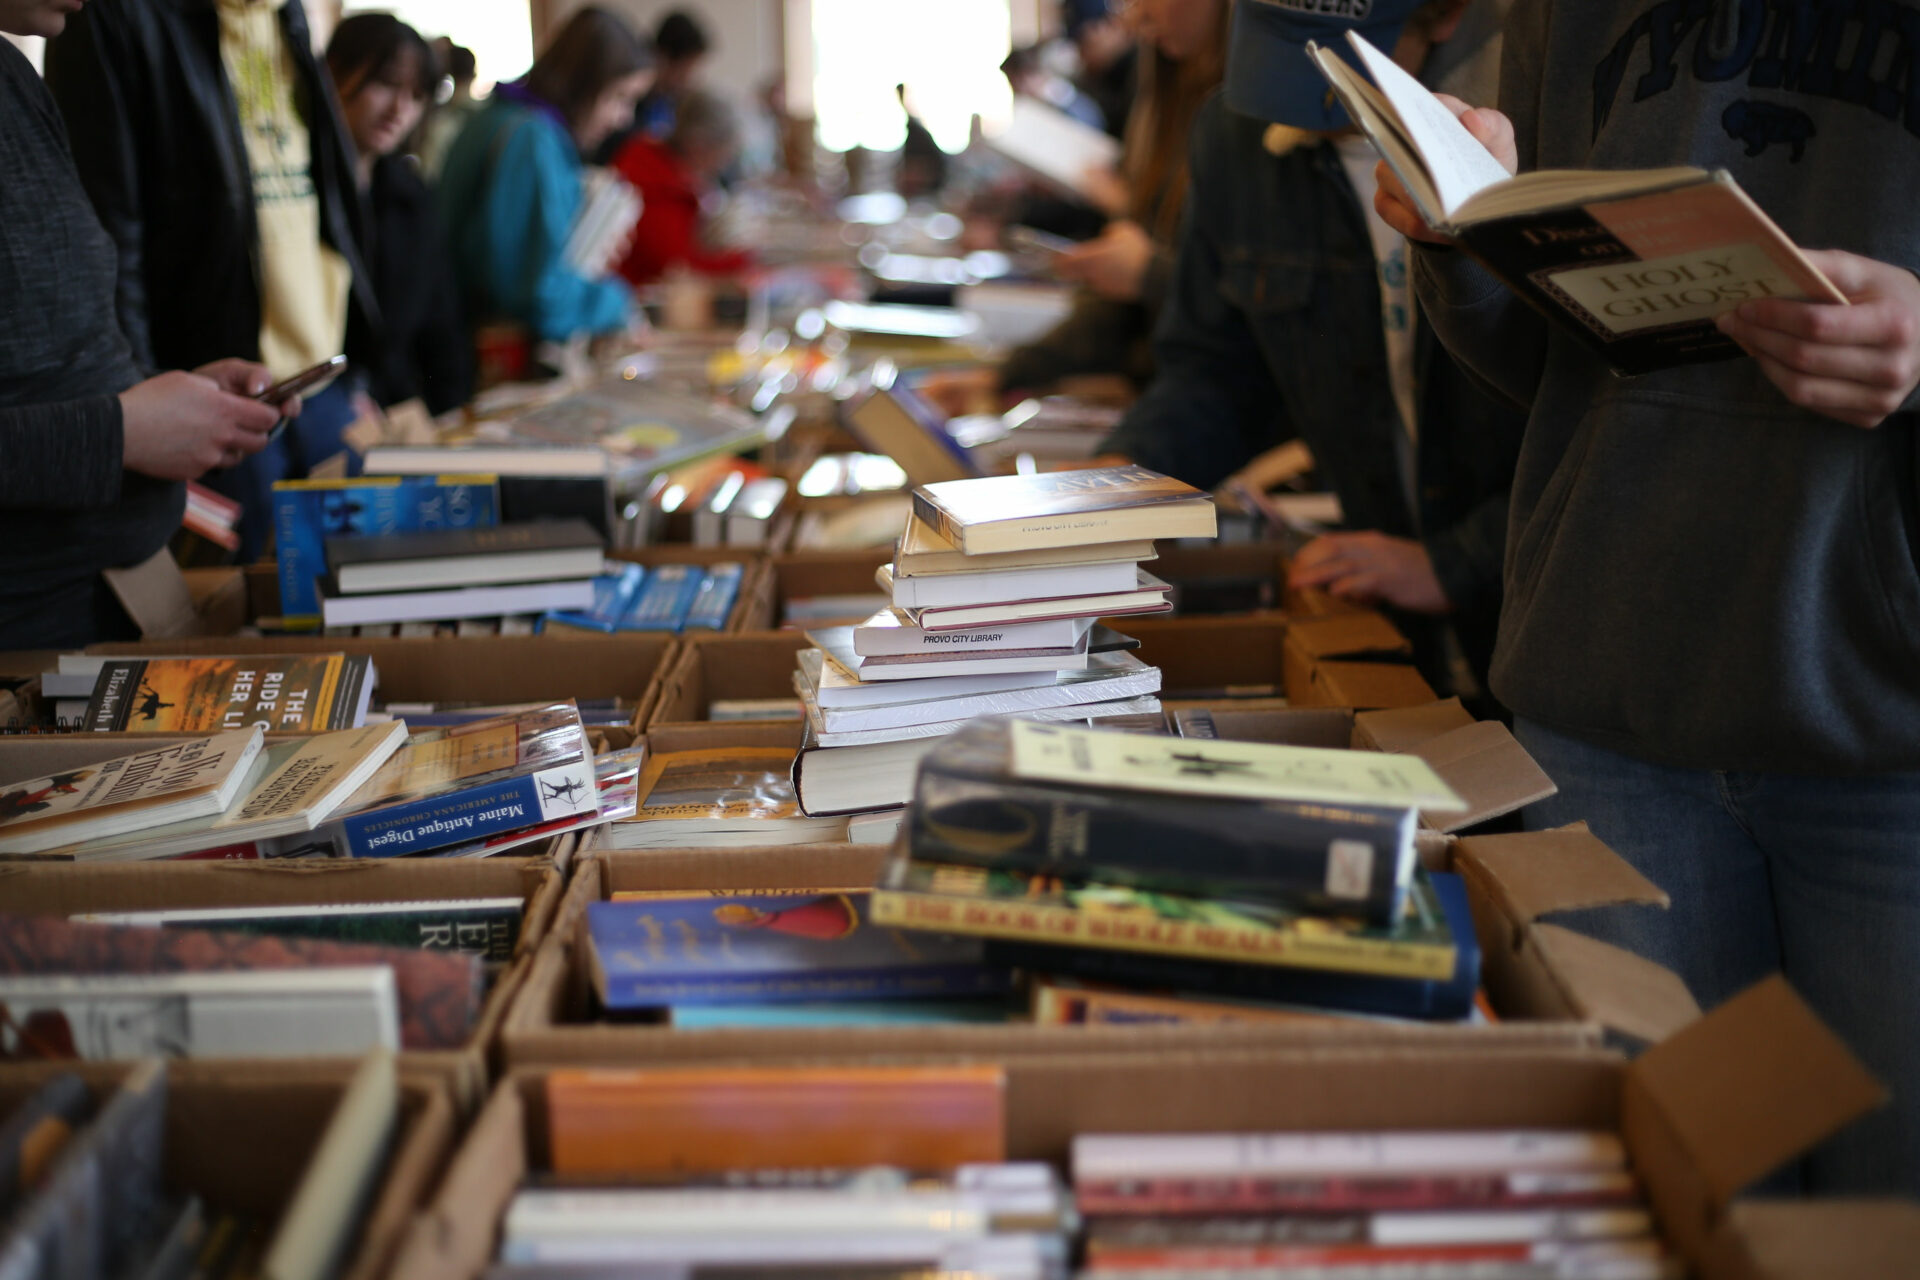 Provo City Library sells books for $1 at Ballroom Book Sale - The Daily ...